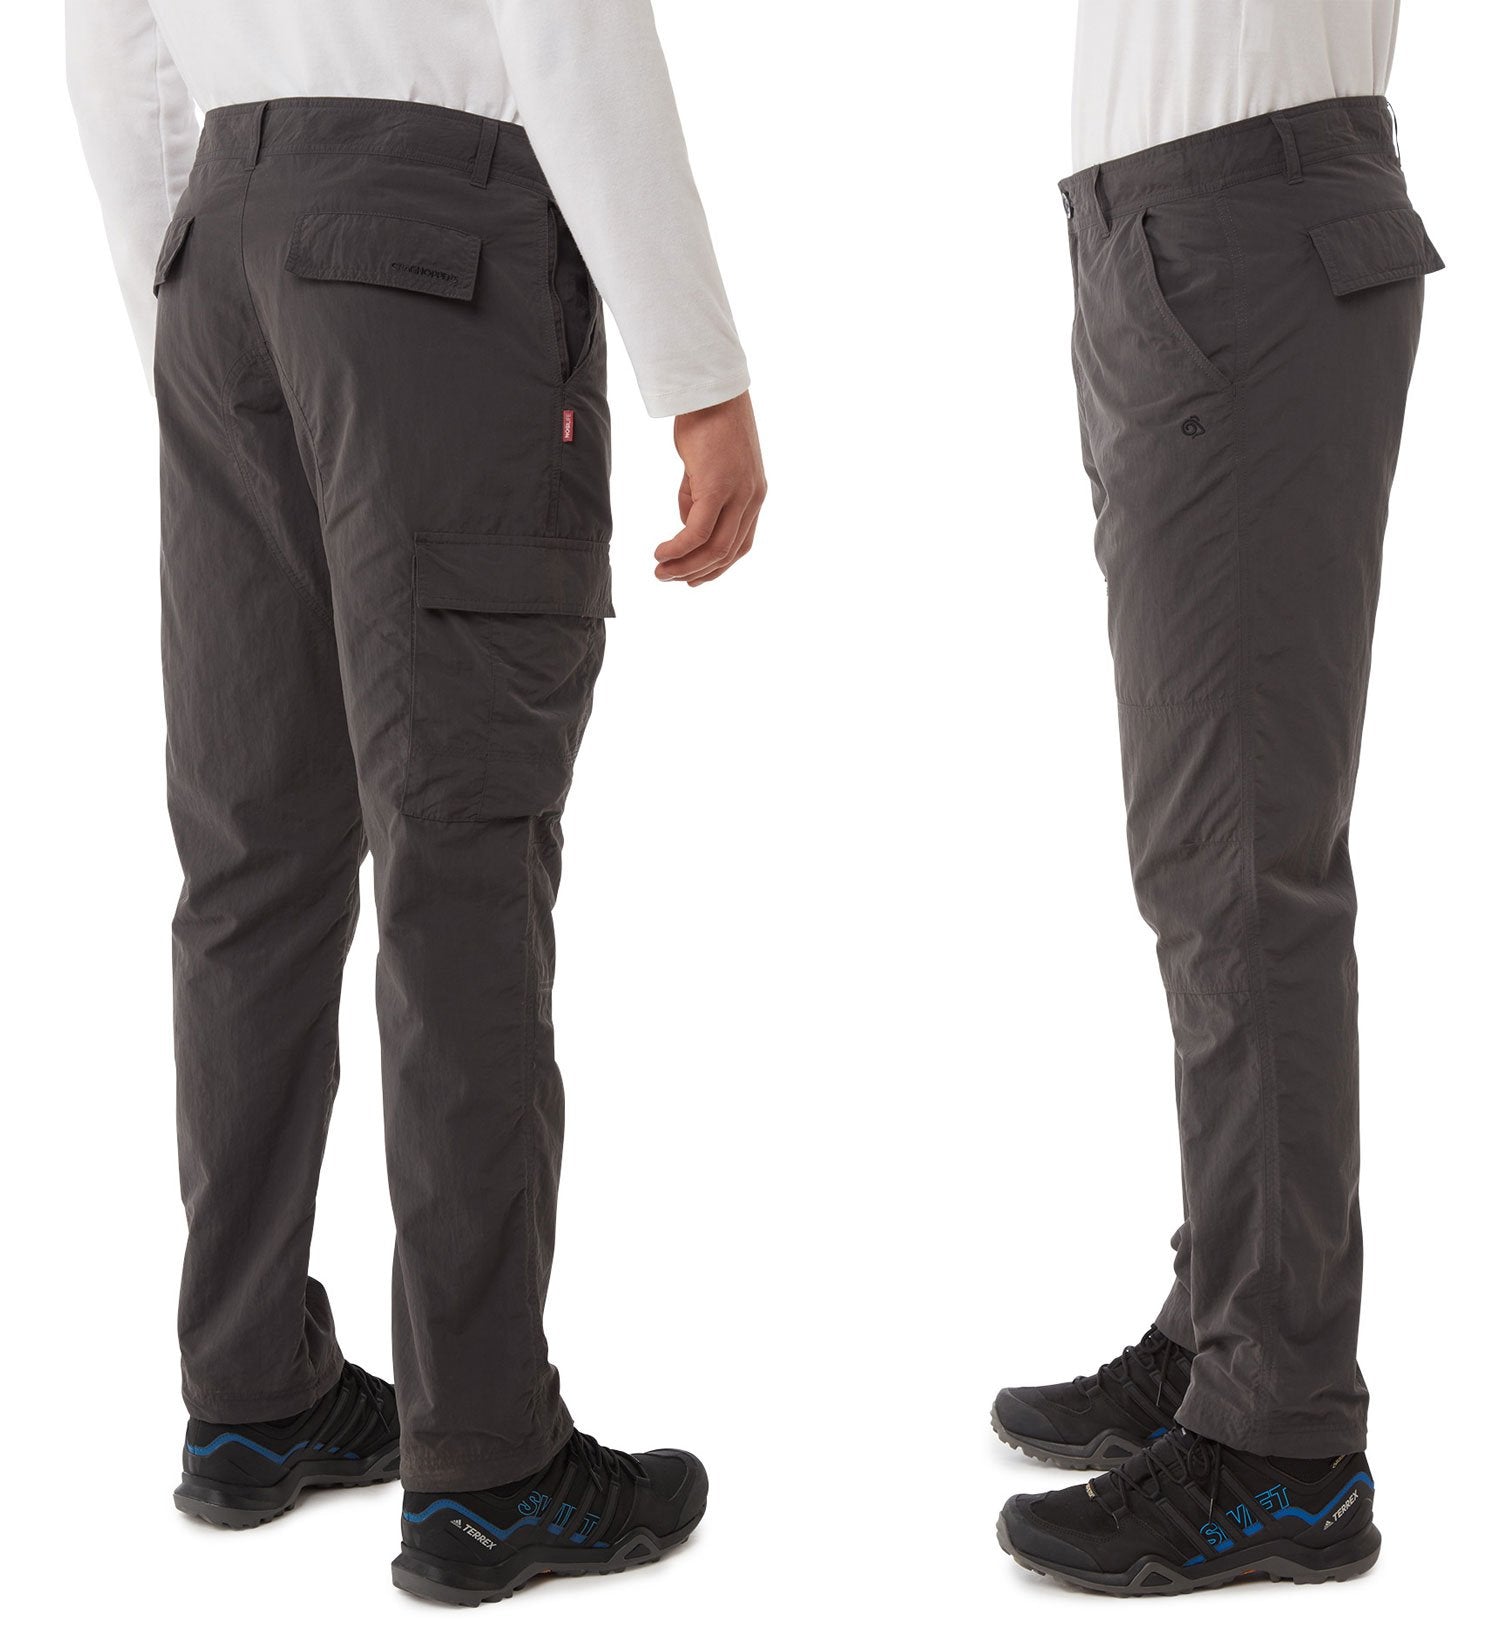 Craghoppers NosiLife Branco Trousers in Black Pepper